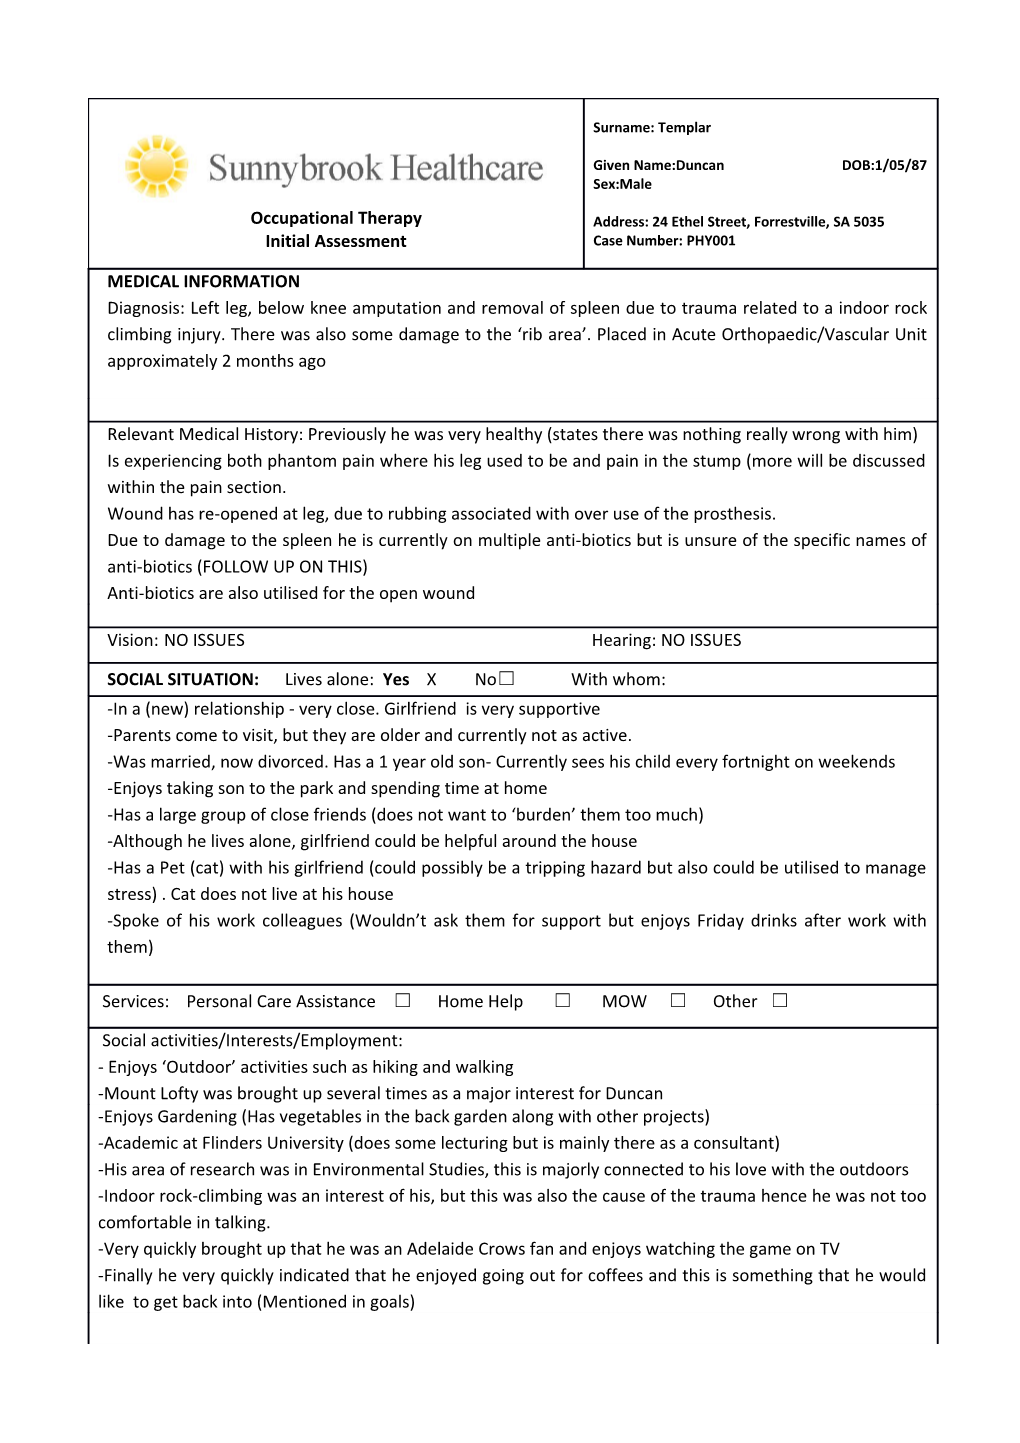 Occupational Therapy Initial Assessment